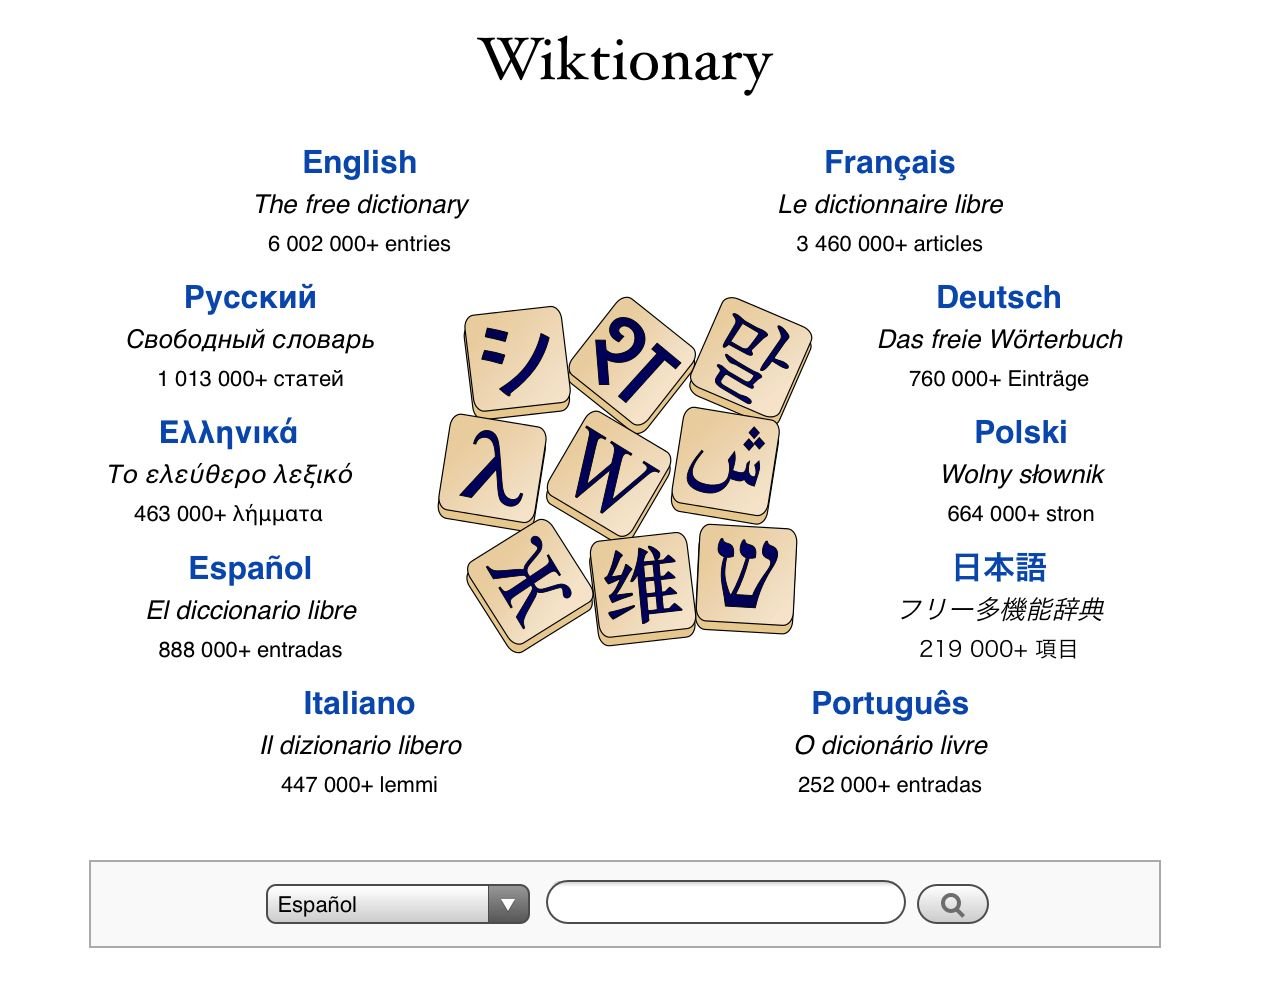 pick - Wiktionary, the free dictionary